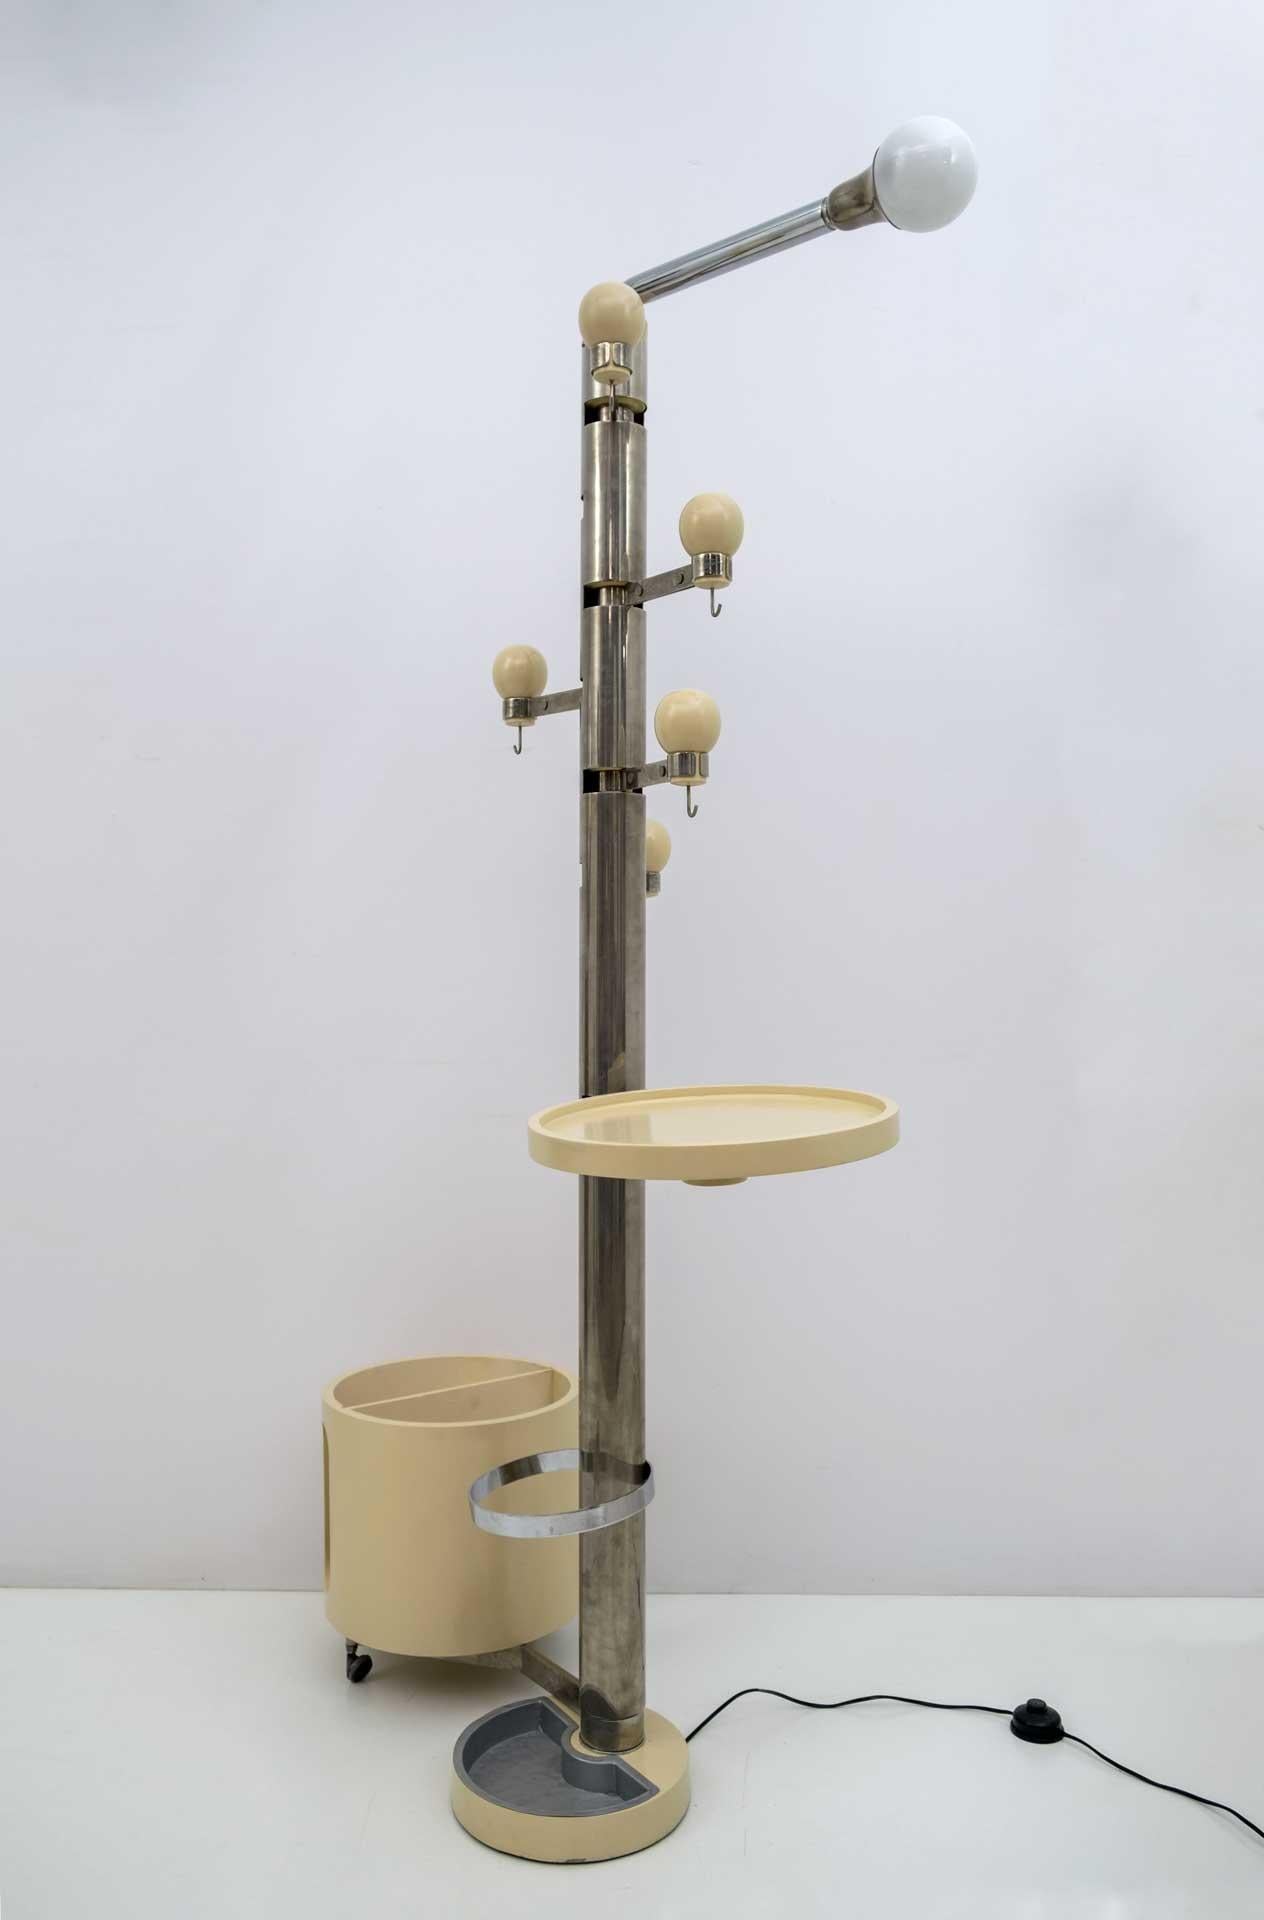 Mid-20th Century Italian Vintage Sculptural Floor Lamp with Steel CoatRack and Umbrella Stand 60s For Sale